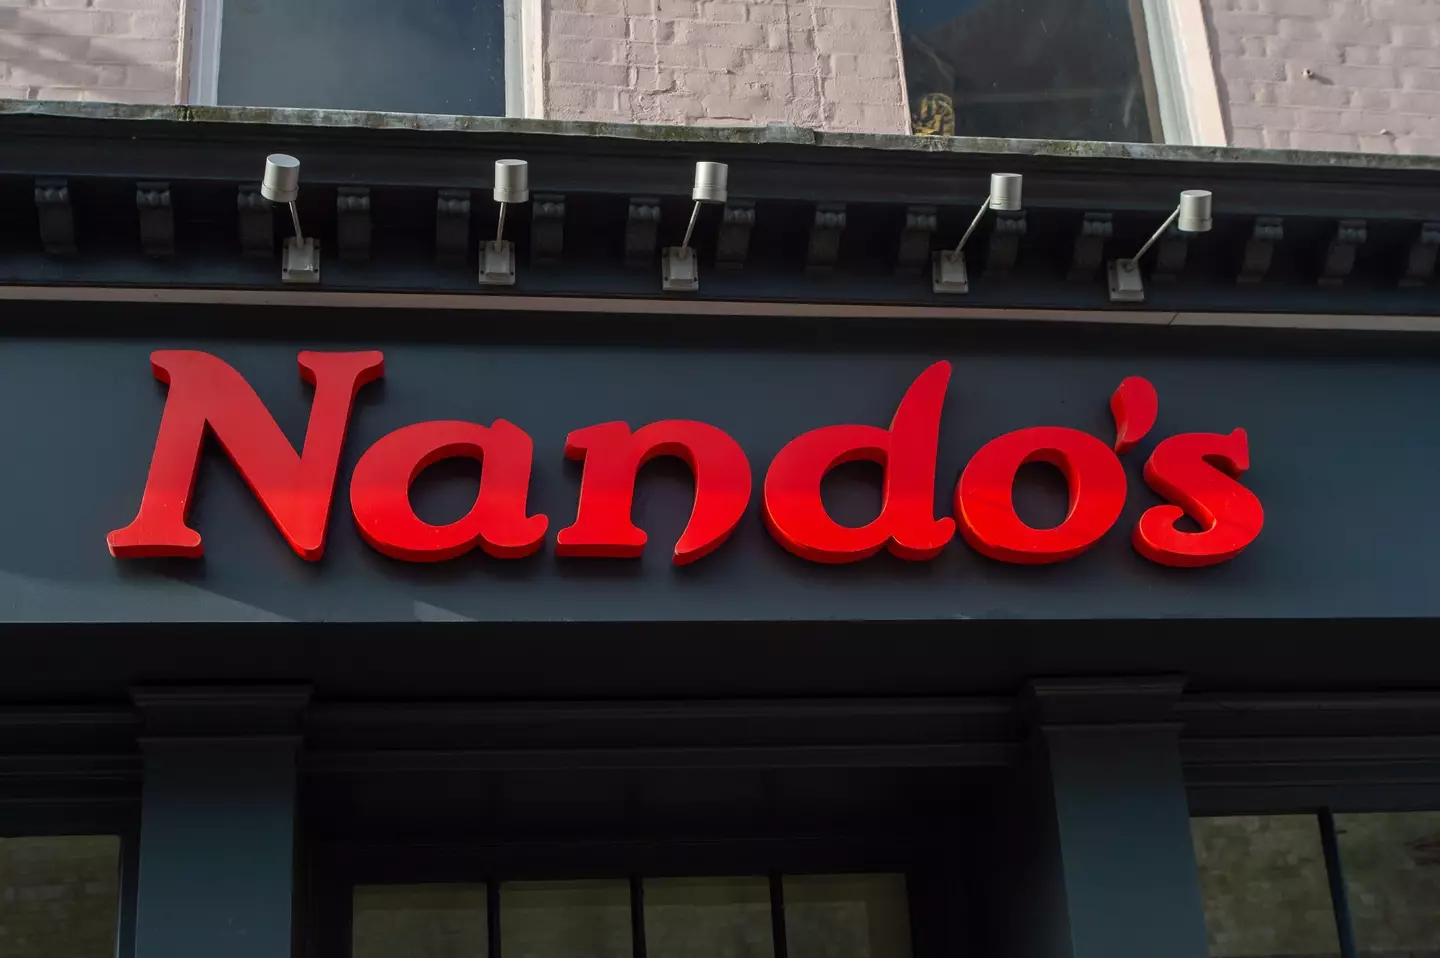 A kids' meal at Nando's is priced at £5.95.